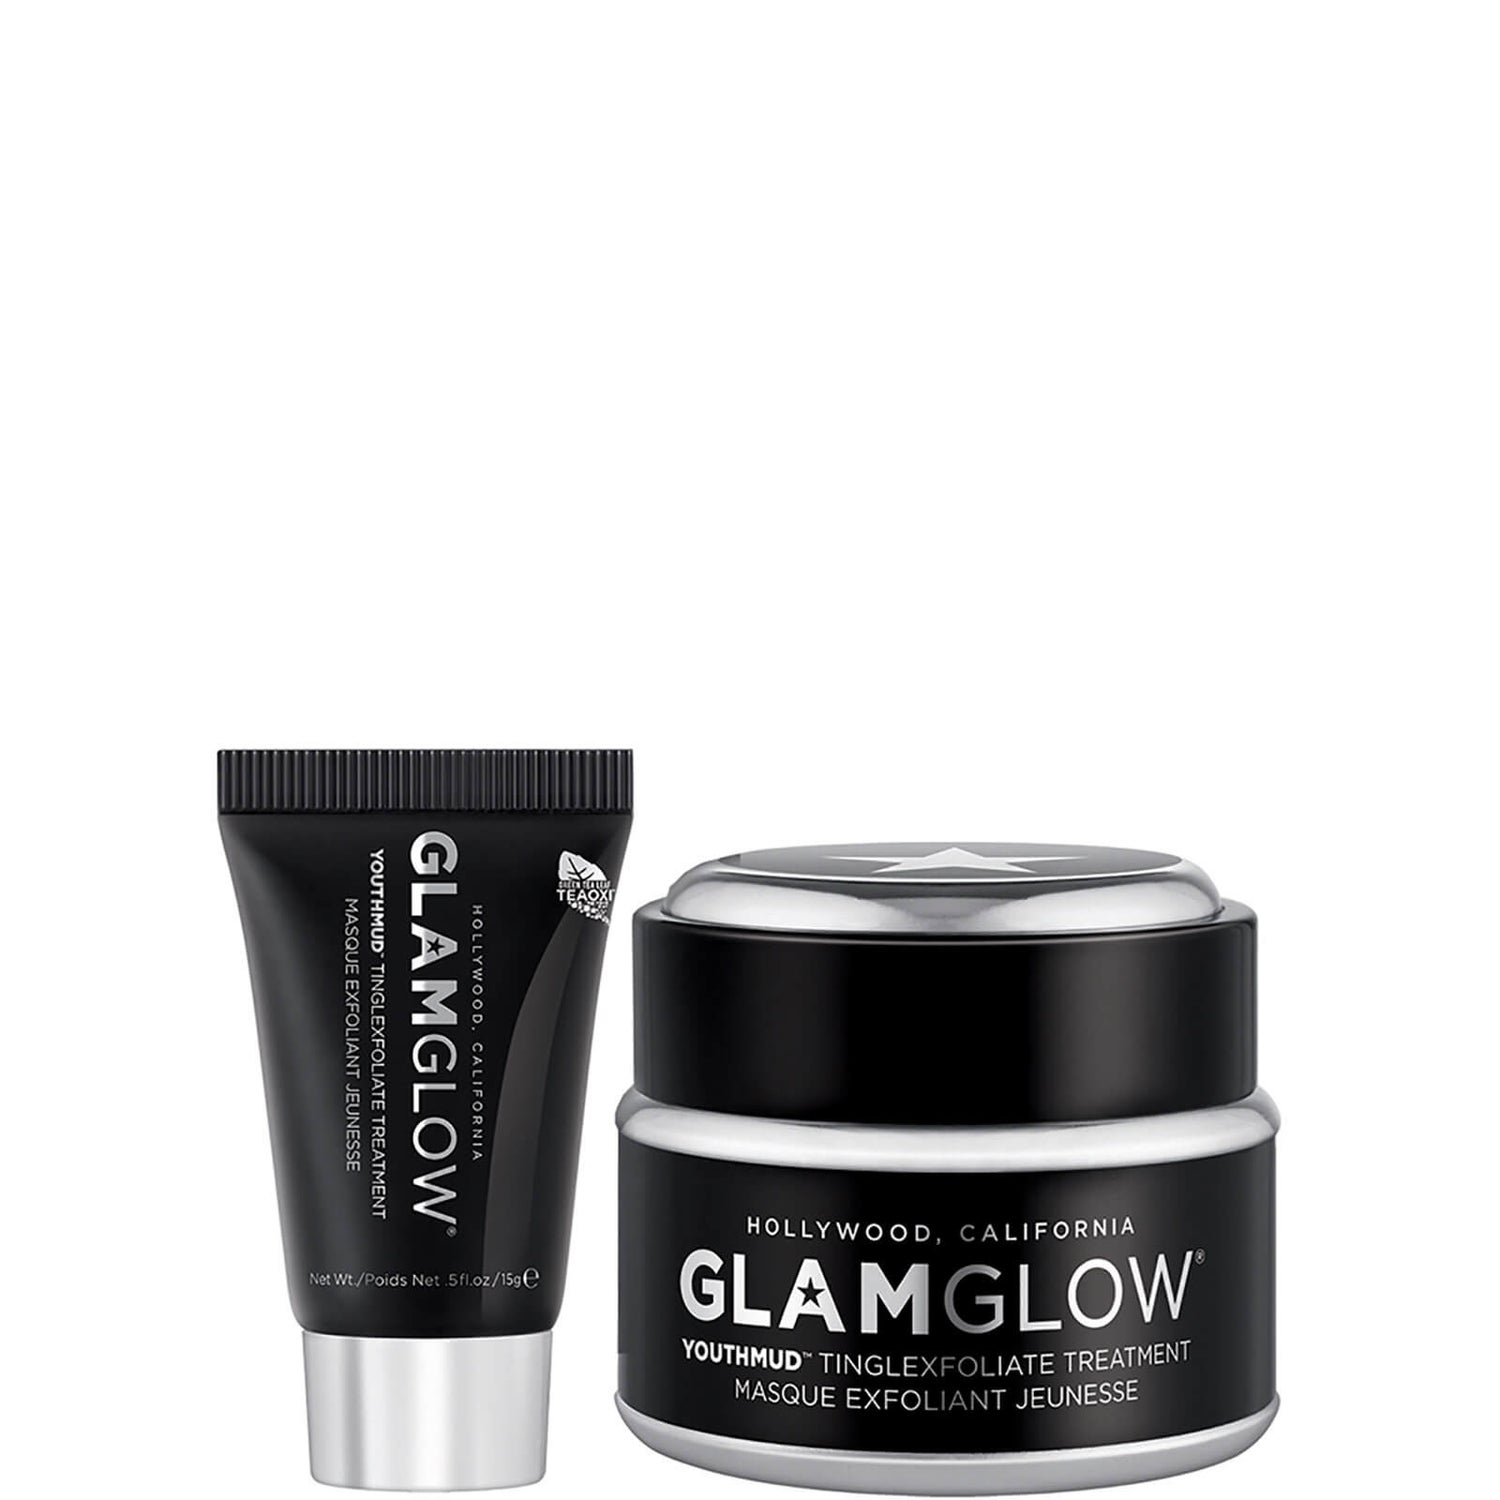 GLAMGLOW Youth Mud Special Kit 2014